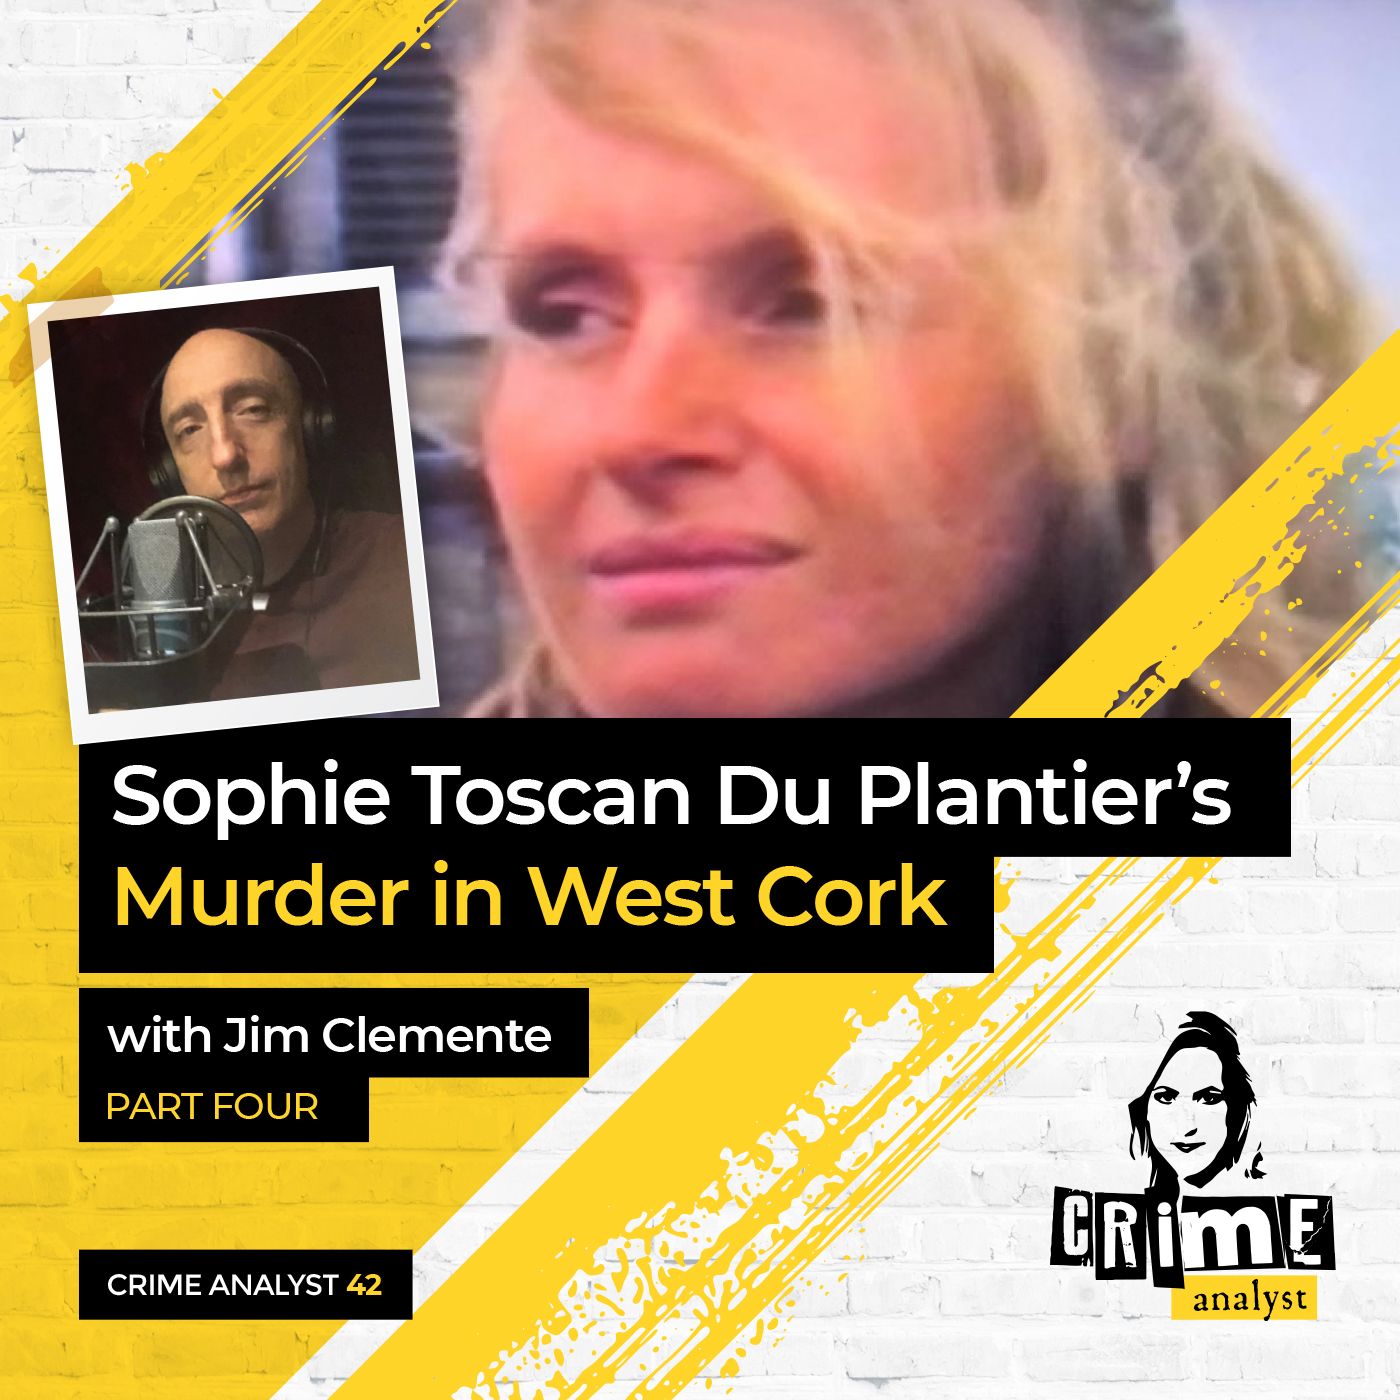 42: The Crime Analyst | Ep 42 | Sophie Toscan Du Plantier’s Murder with Jim Clemente,, Part 4 Image